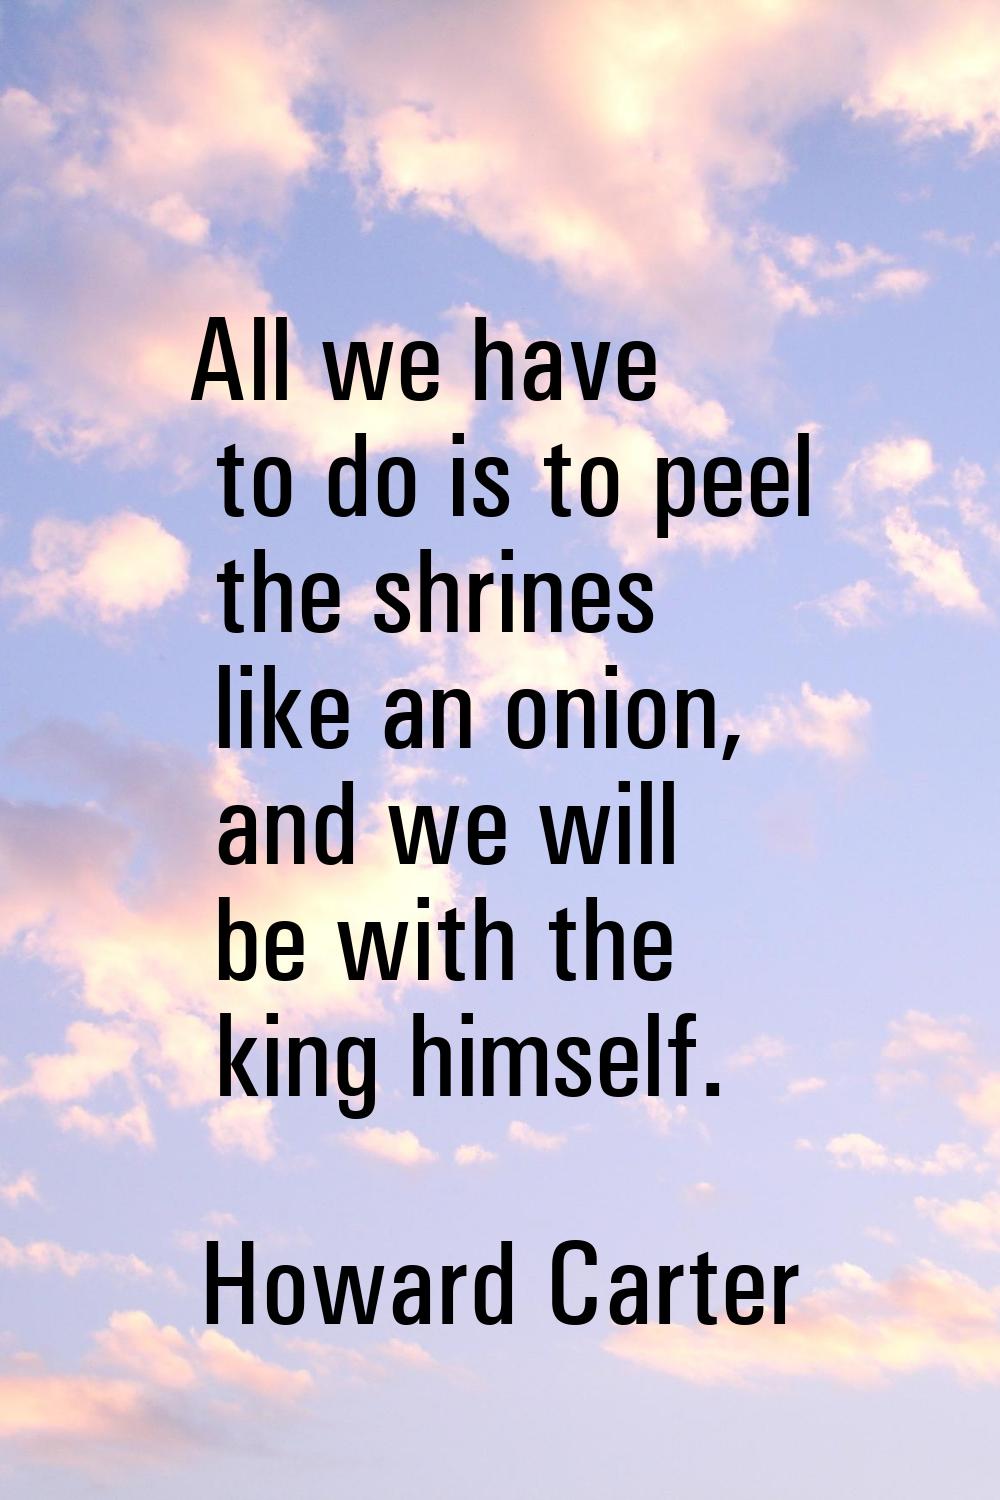 All we have to do is to peel the shrines like an onion, and we will be with the king himself.